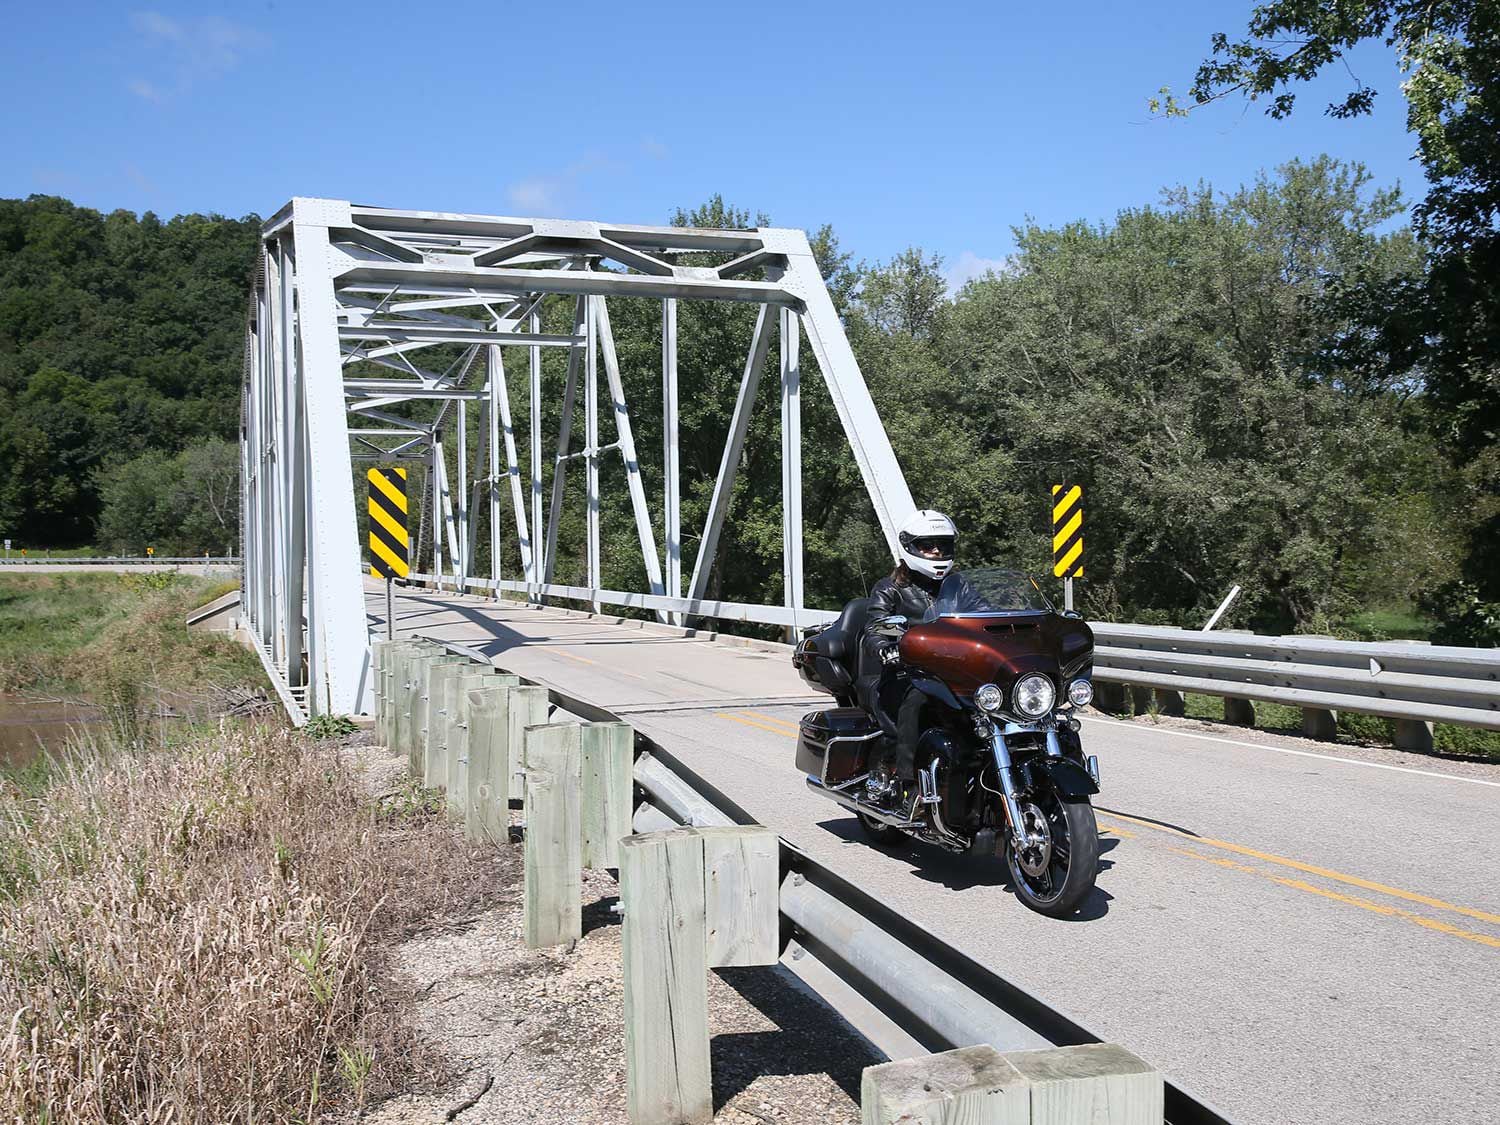 Harley-Davidson’s Ultra Limited is a full dresser ready for long miles on the open road.